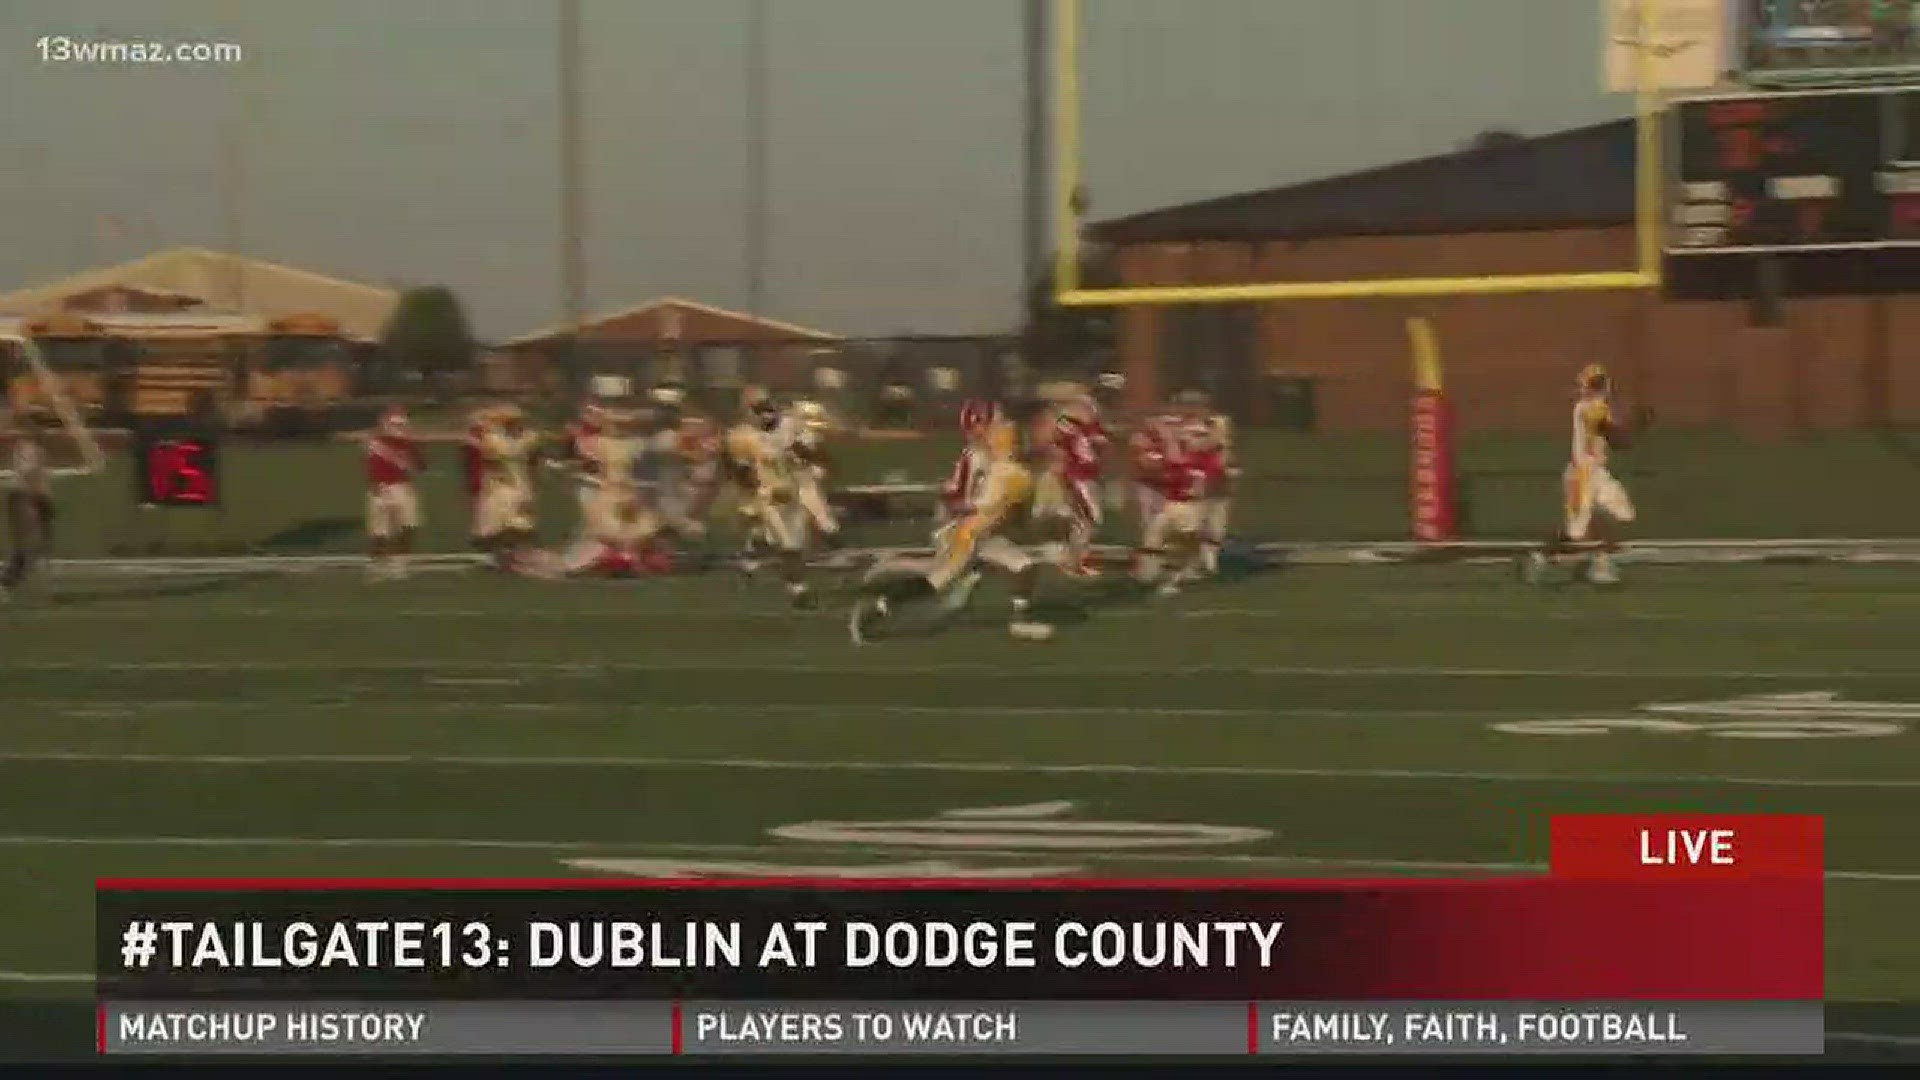 #tailgate13: Dublin at Dodge County